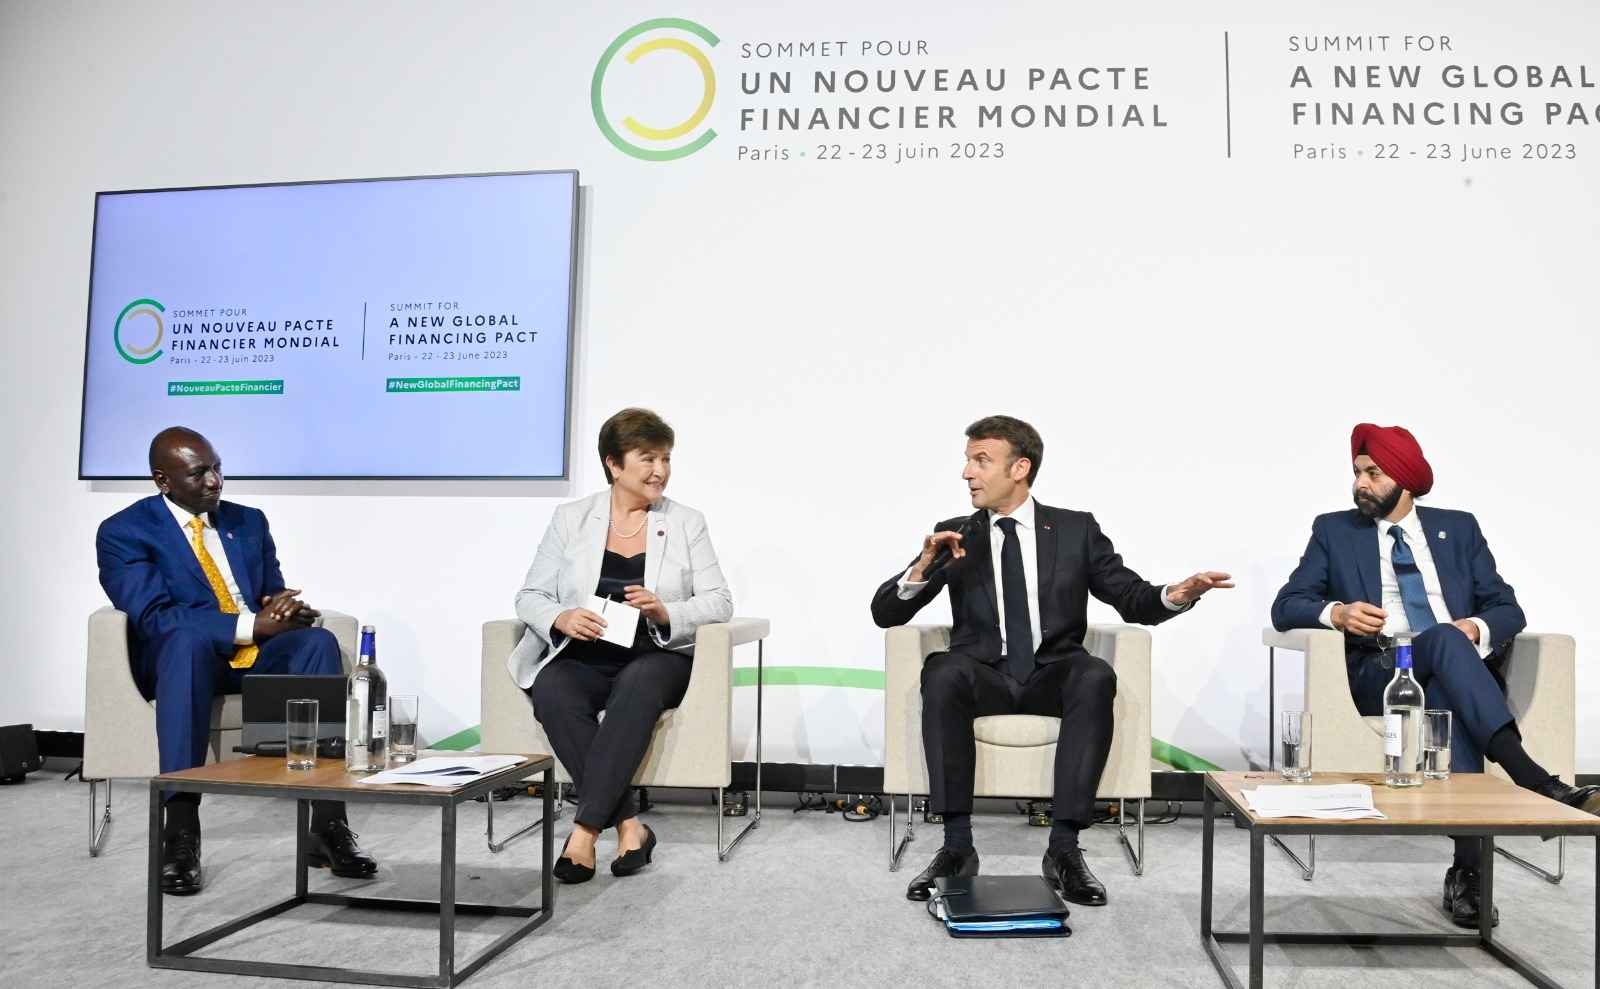 President during a round-table with President of France Emmanuel Macron, IMF MD Kristalina Georgieva, and the President of the World Bank Group Ajay Banga in the ongoing New Global Financial Pact Summit in Paris.